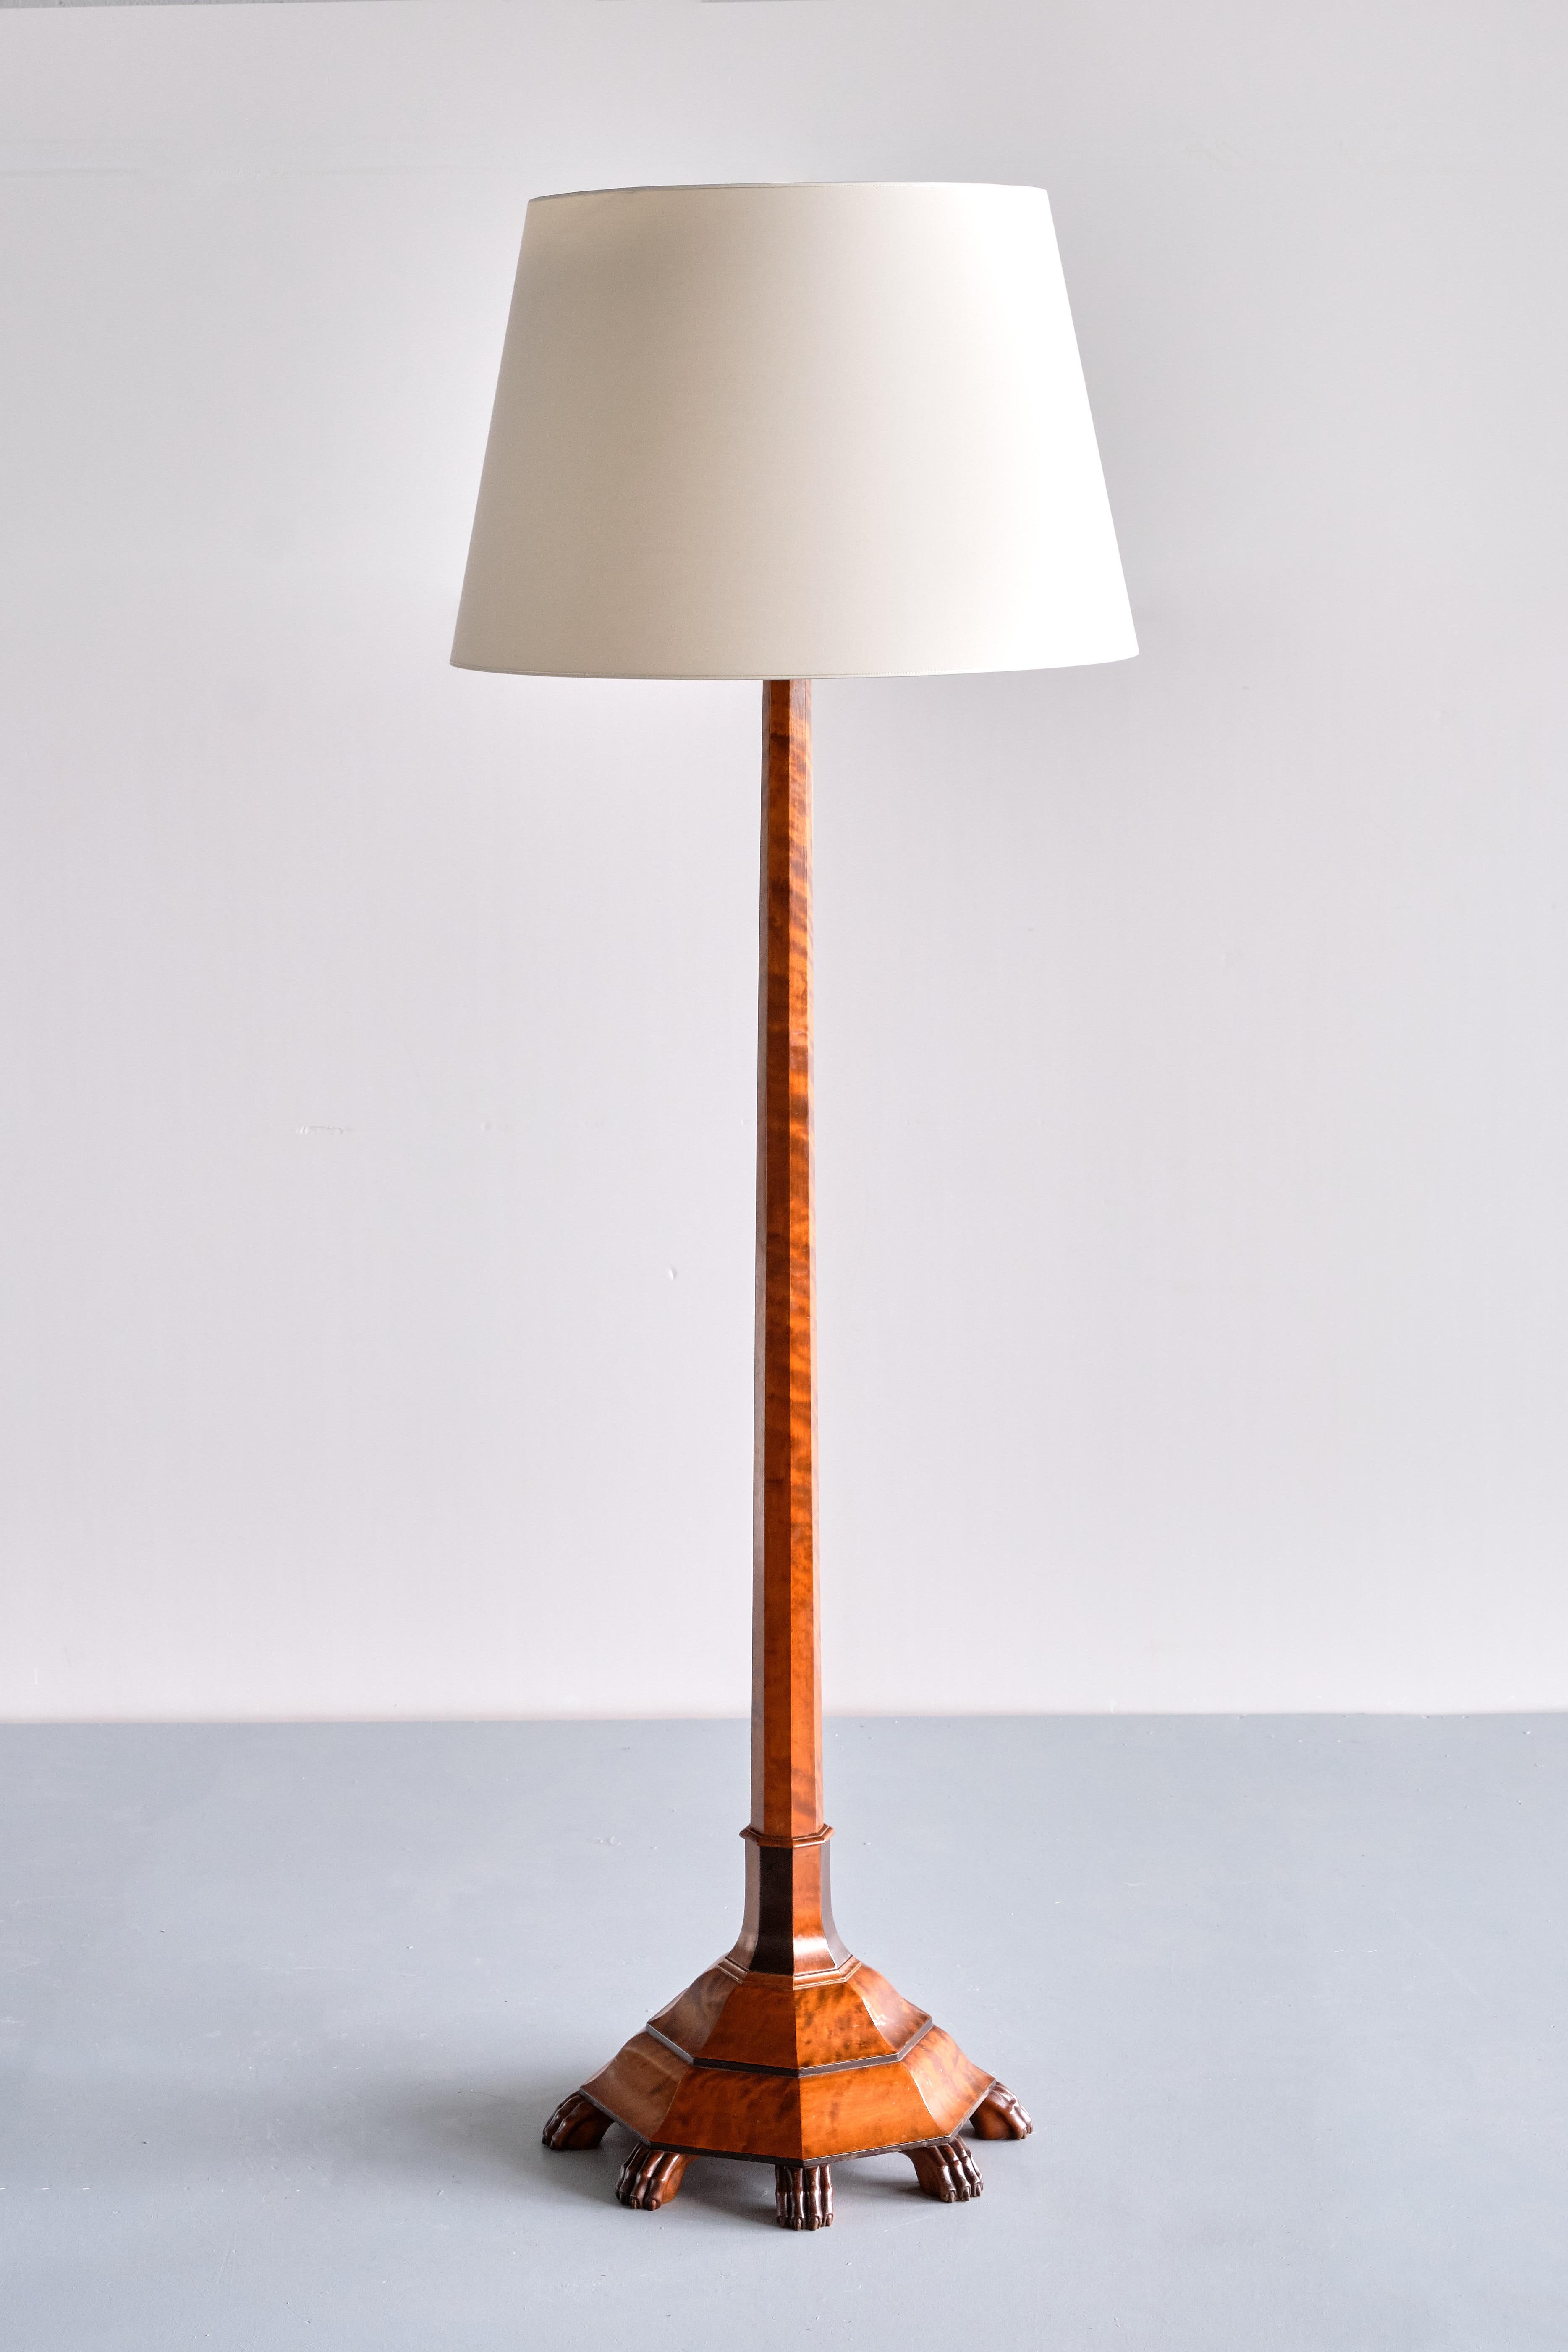 This striking floor lamp was produced in Sweden in the mid-1920s. The elegant design is exemplary for the Swedish Grace style with its combination of the architectural octagonal pattern and (neo)classical details. In the 1920s a young and talented